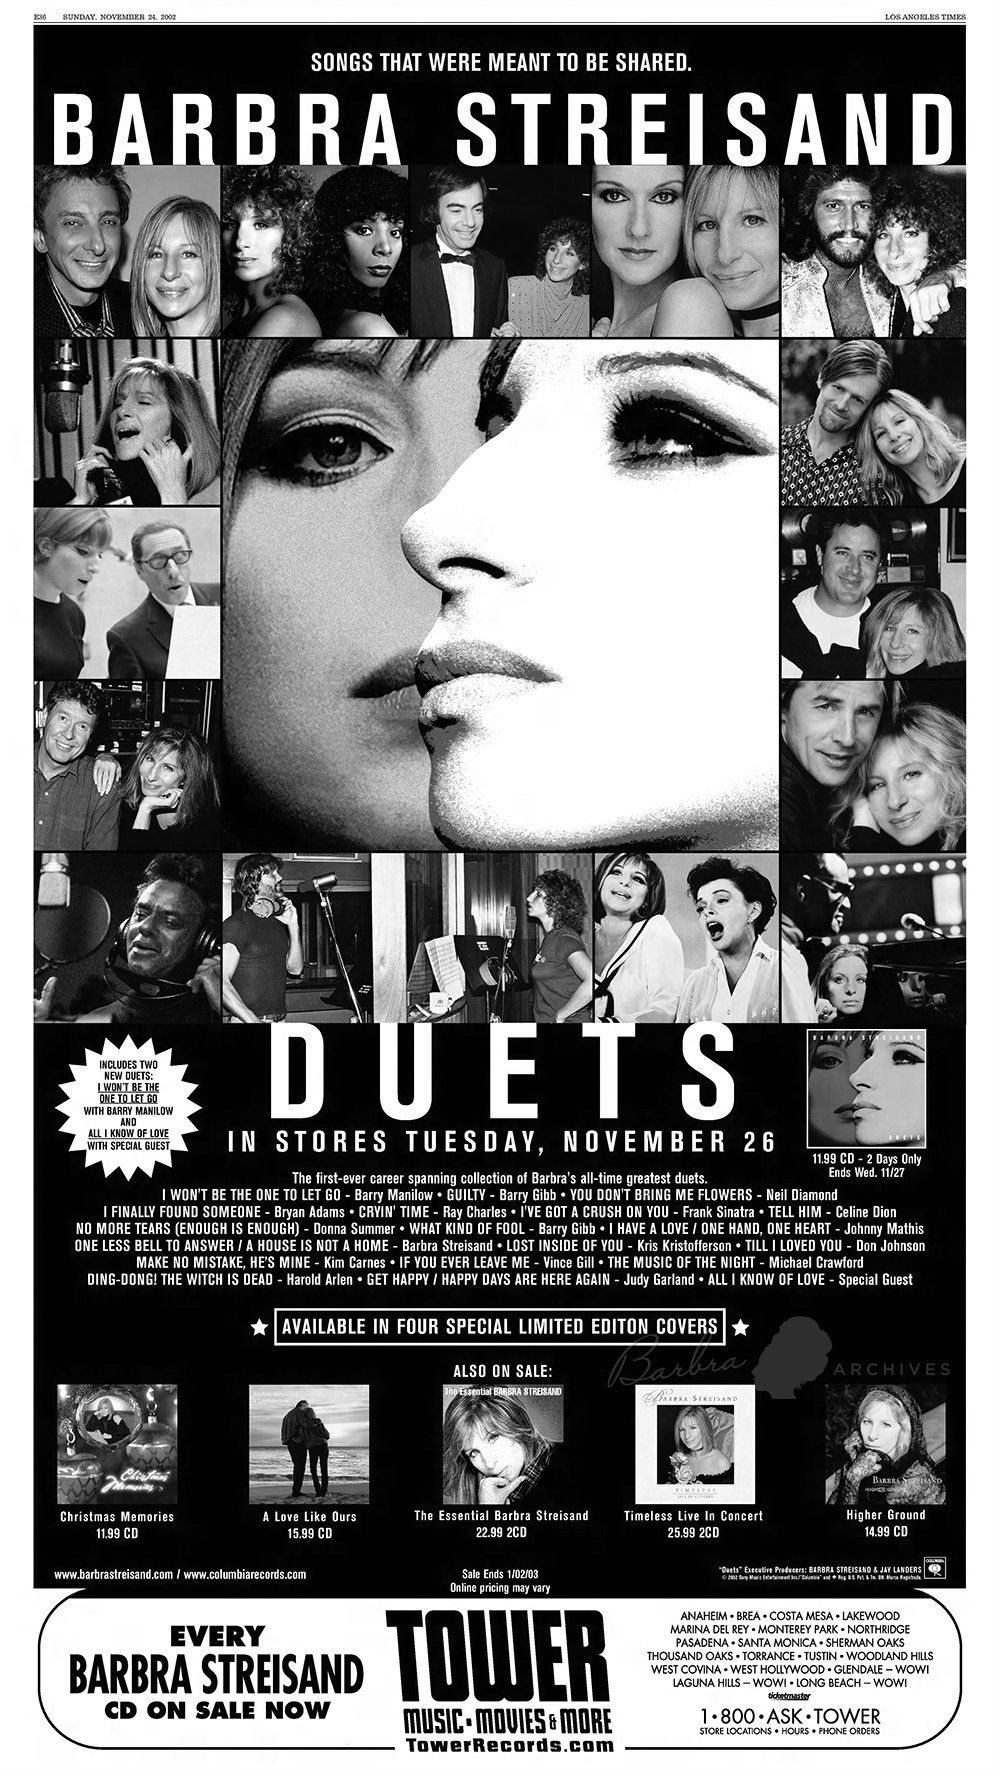 Tower Records ad for the 2002 Streisand Album DUETS.